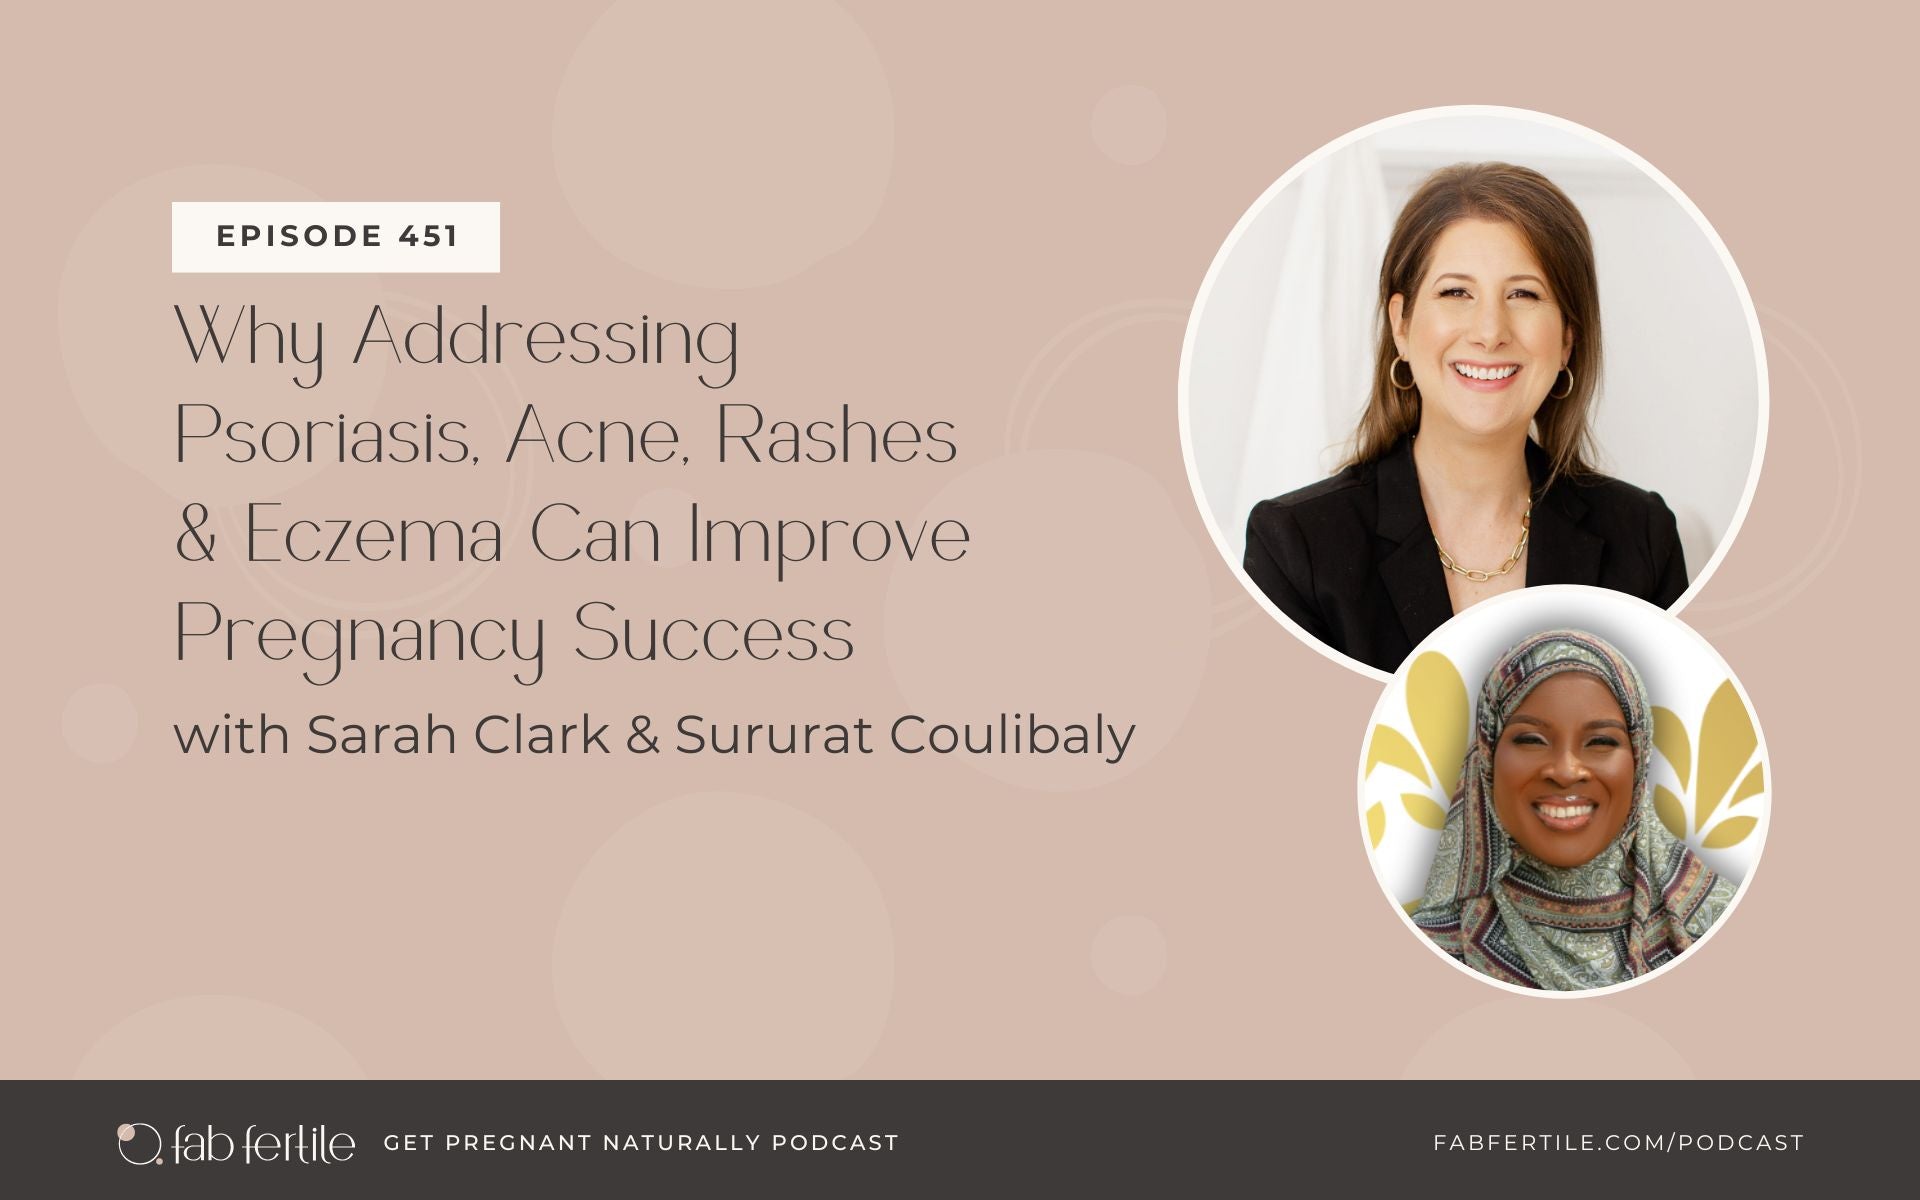 Why Addressing Psoriasis, Acne, Rashes & Eczema Can Improve Pregnancy Success with Sururat Coulibaly